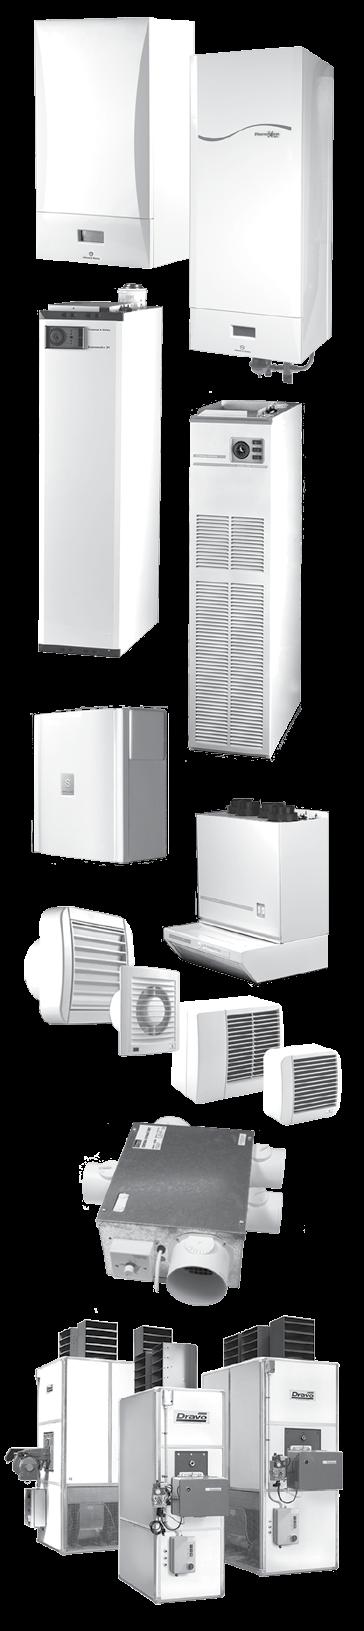 Johnson & Starley are the leading UK & European manufacturers of a complete range of Domestic Warm Air Heaters.